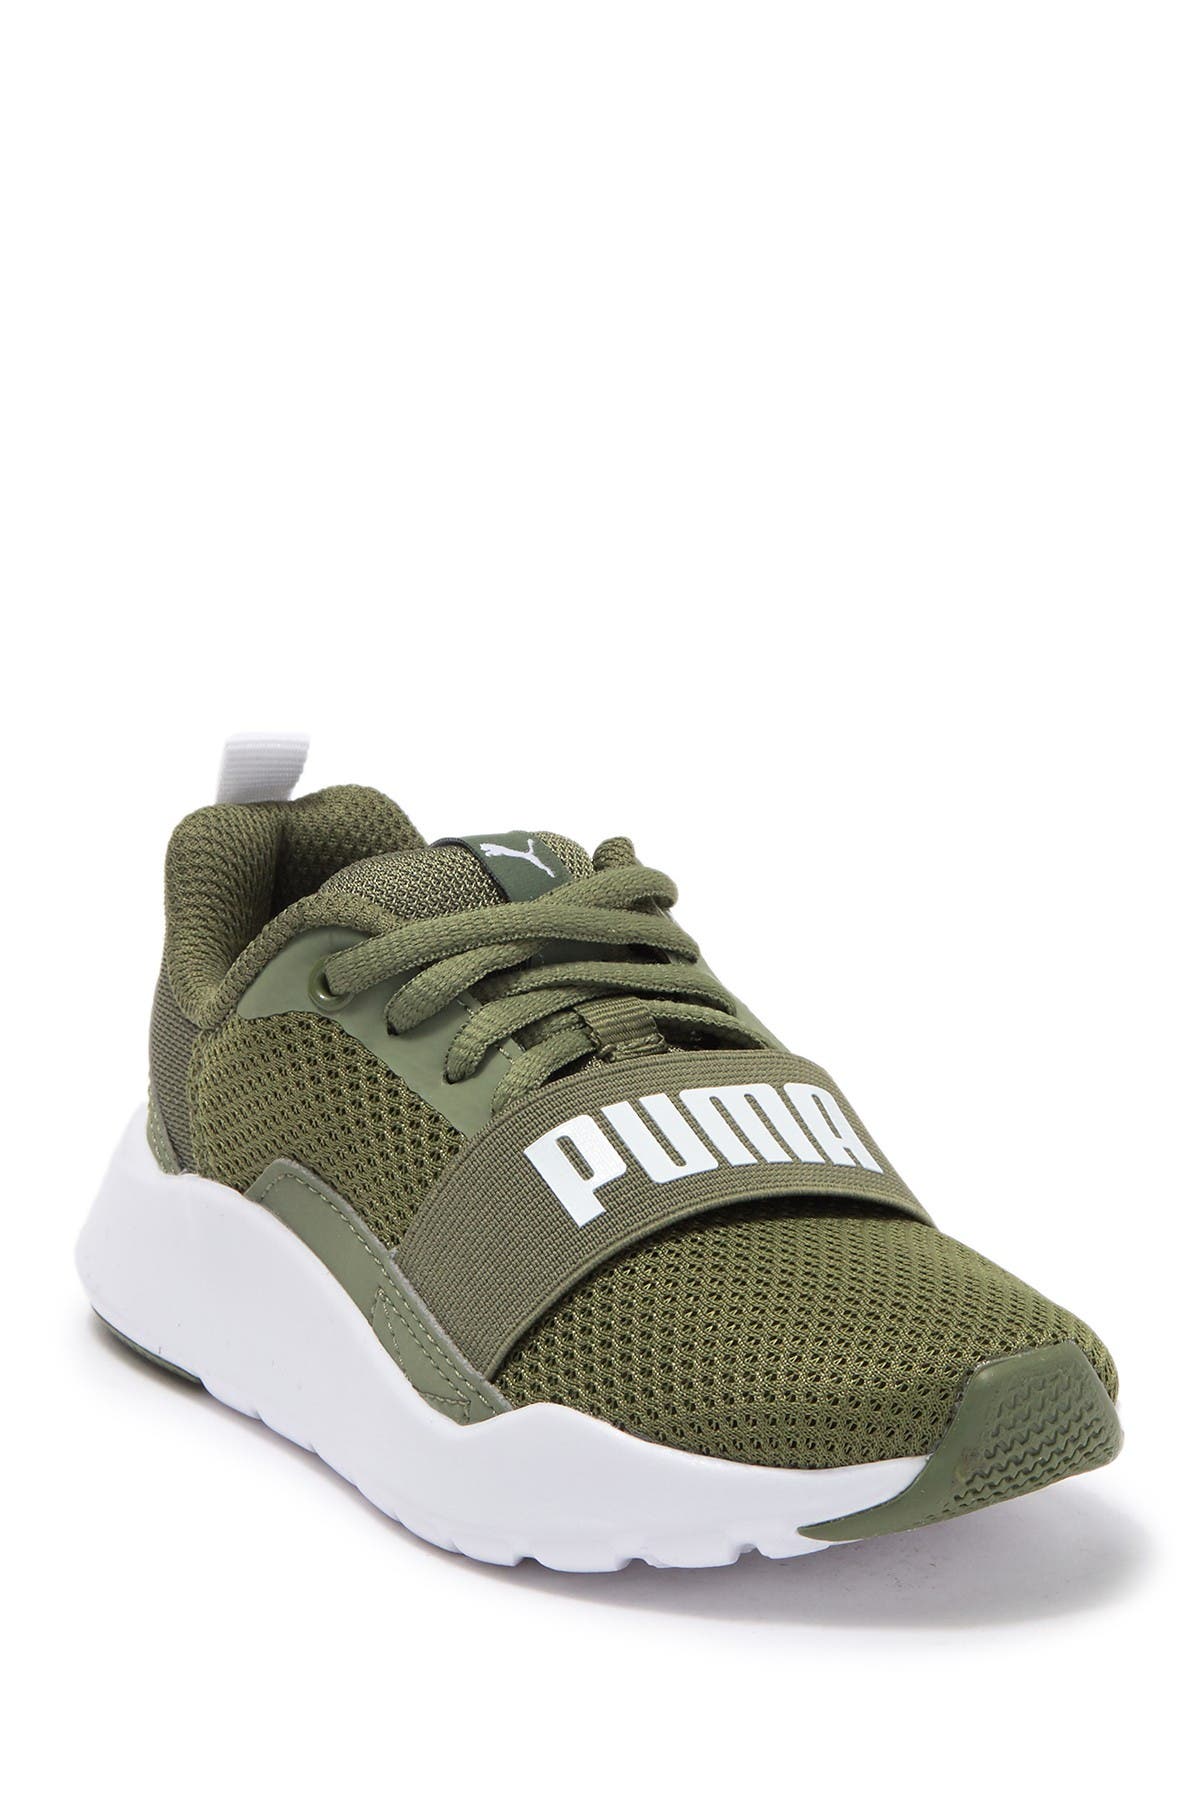 puma white wired ps sneakers